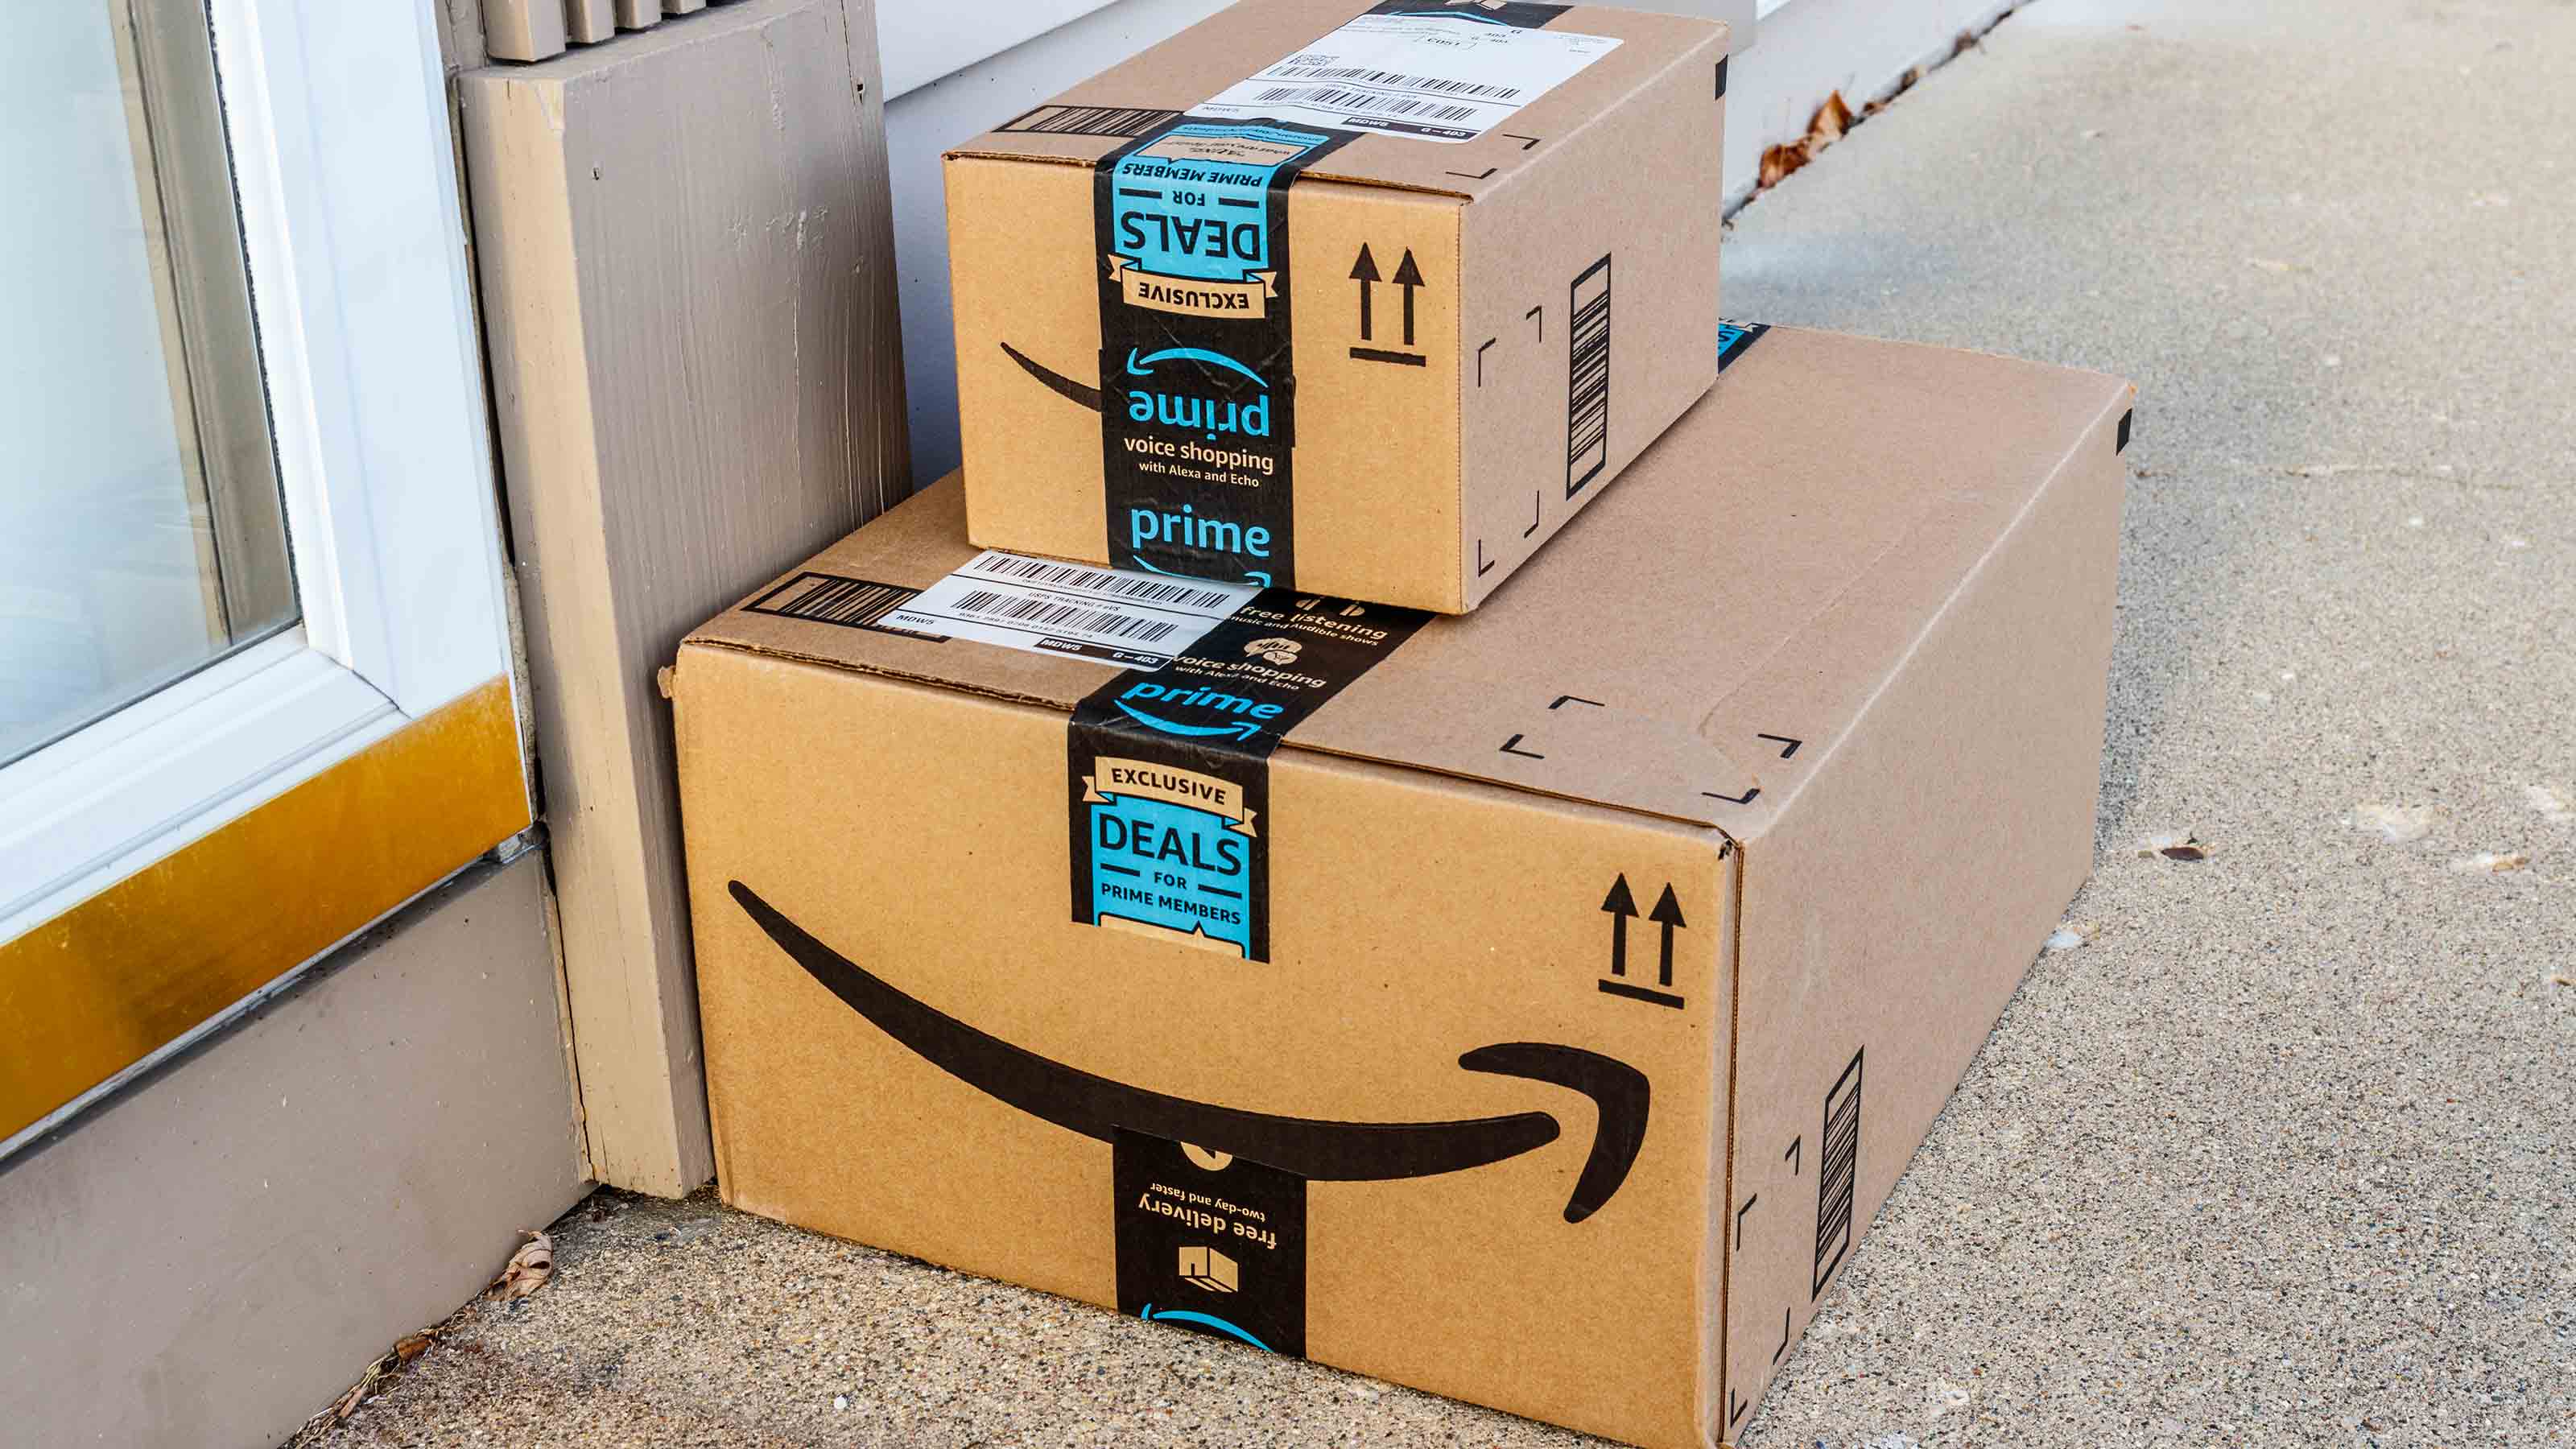 Prime Day 2020 sale: Date, discounts, deals and more